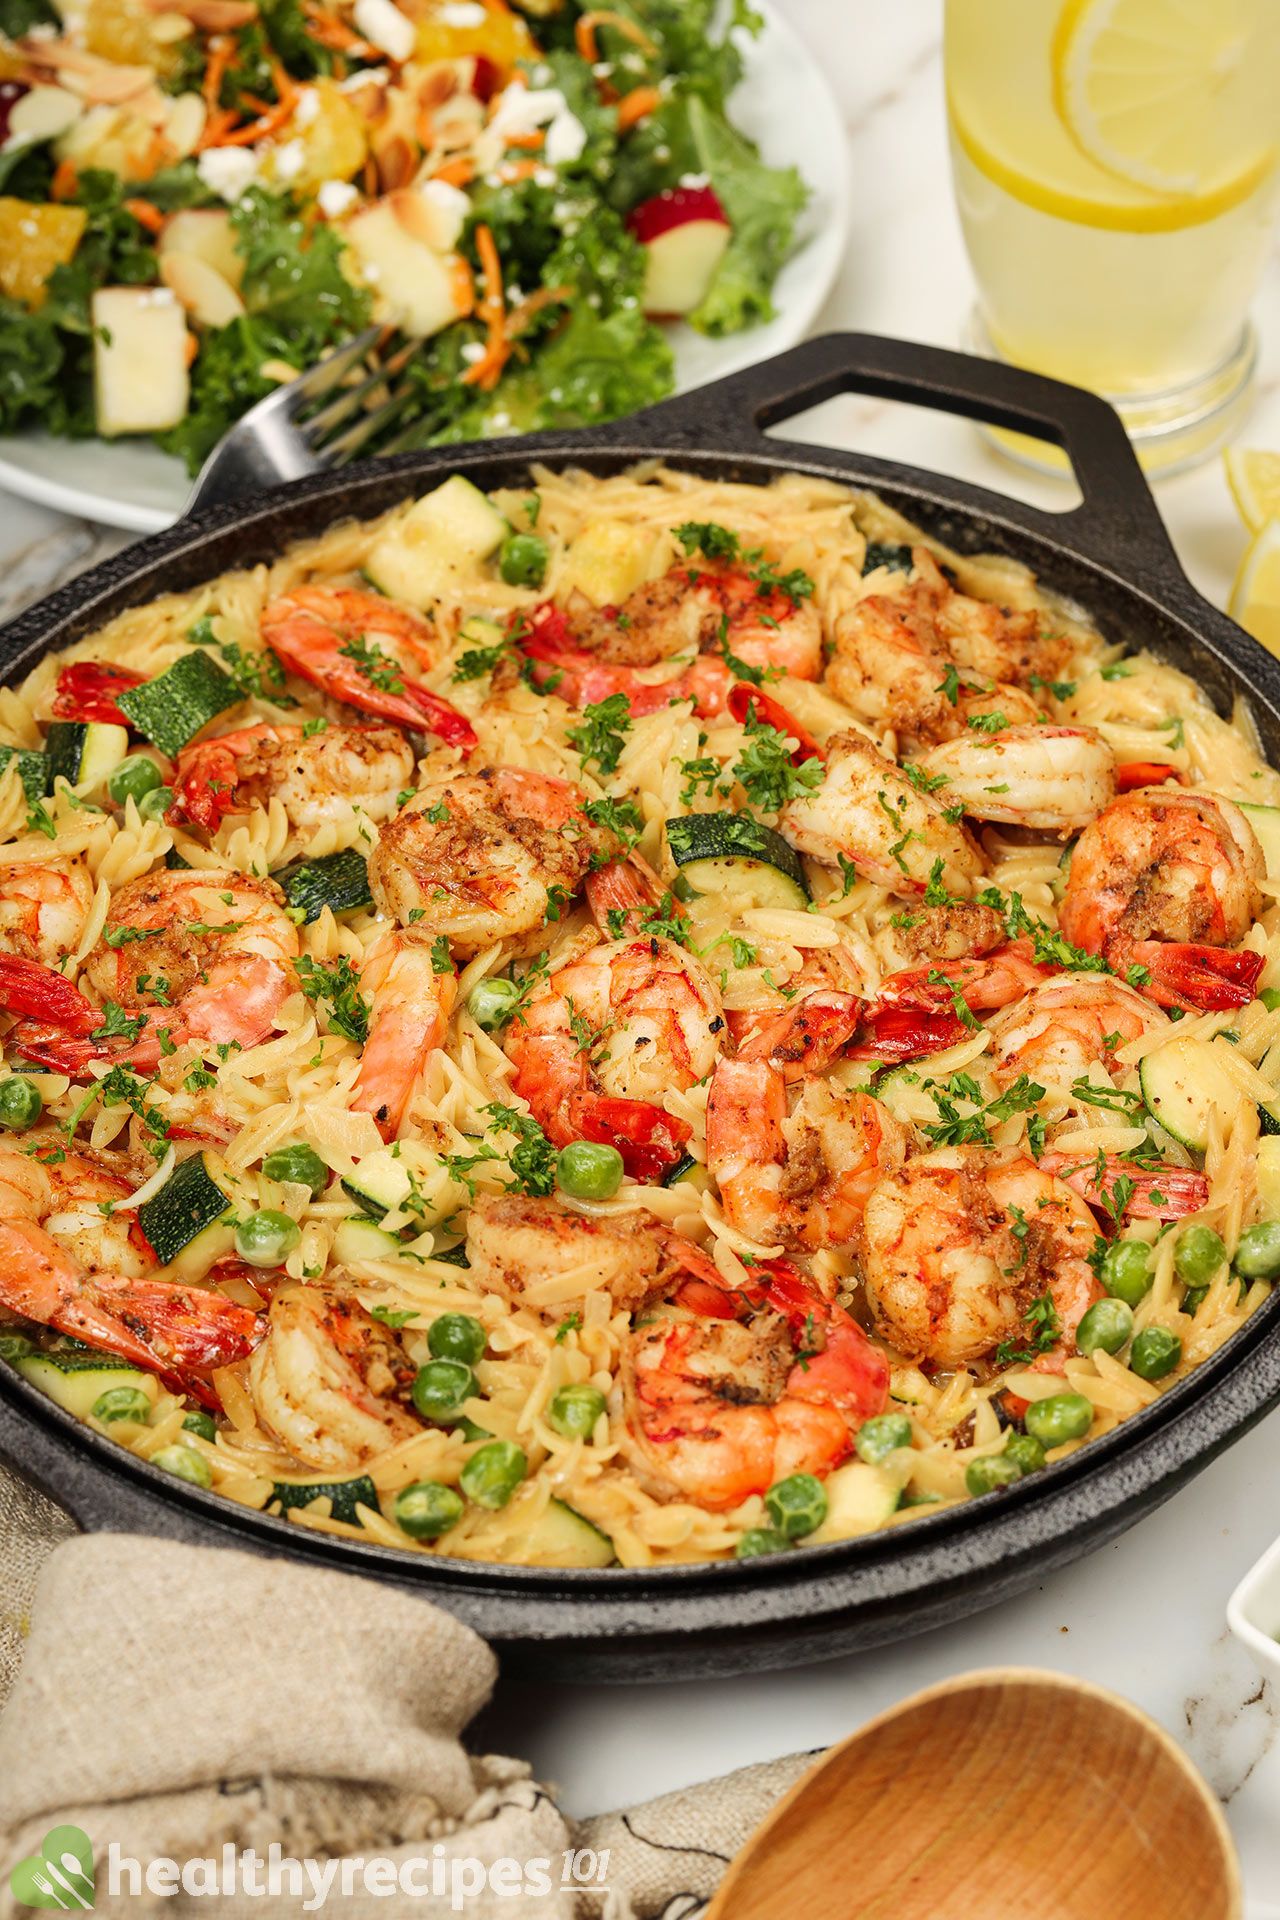 What to Serve With Shrimp Orzo